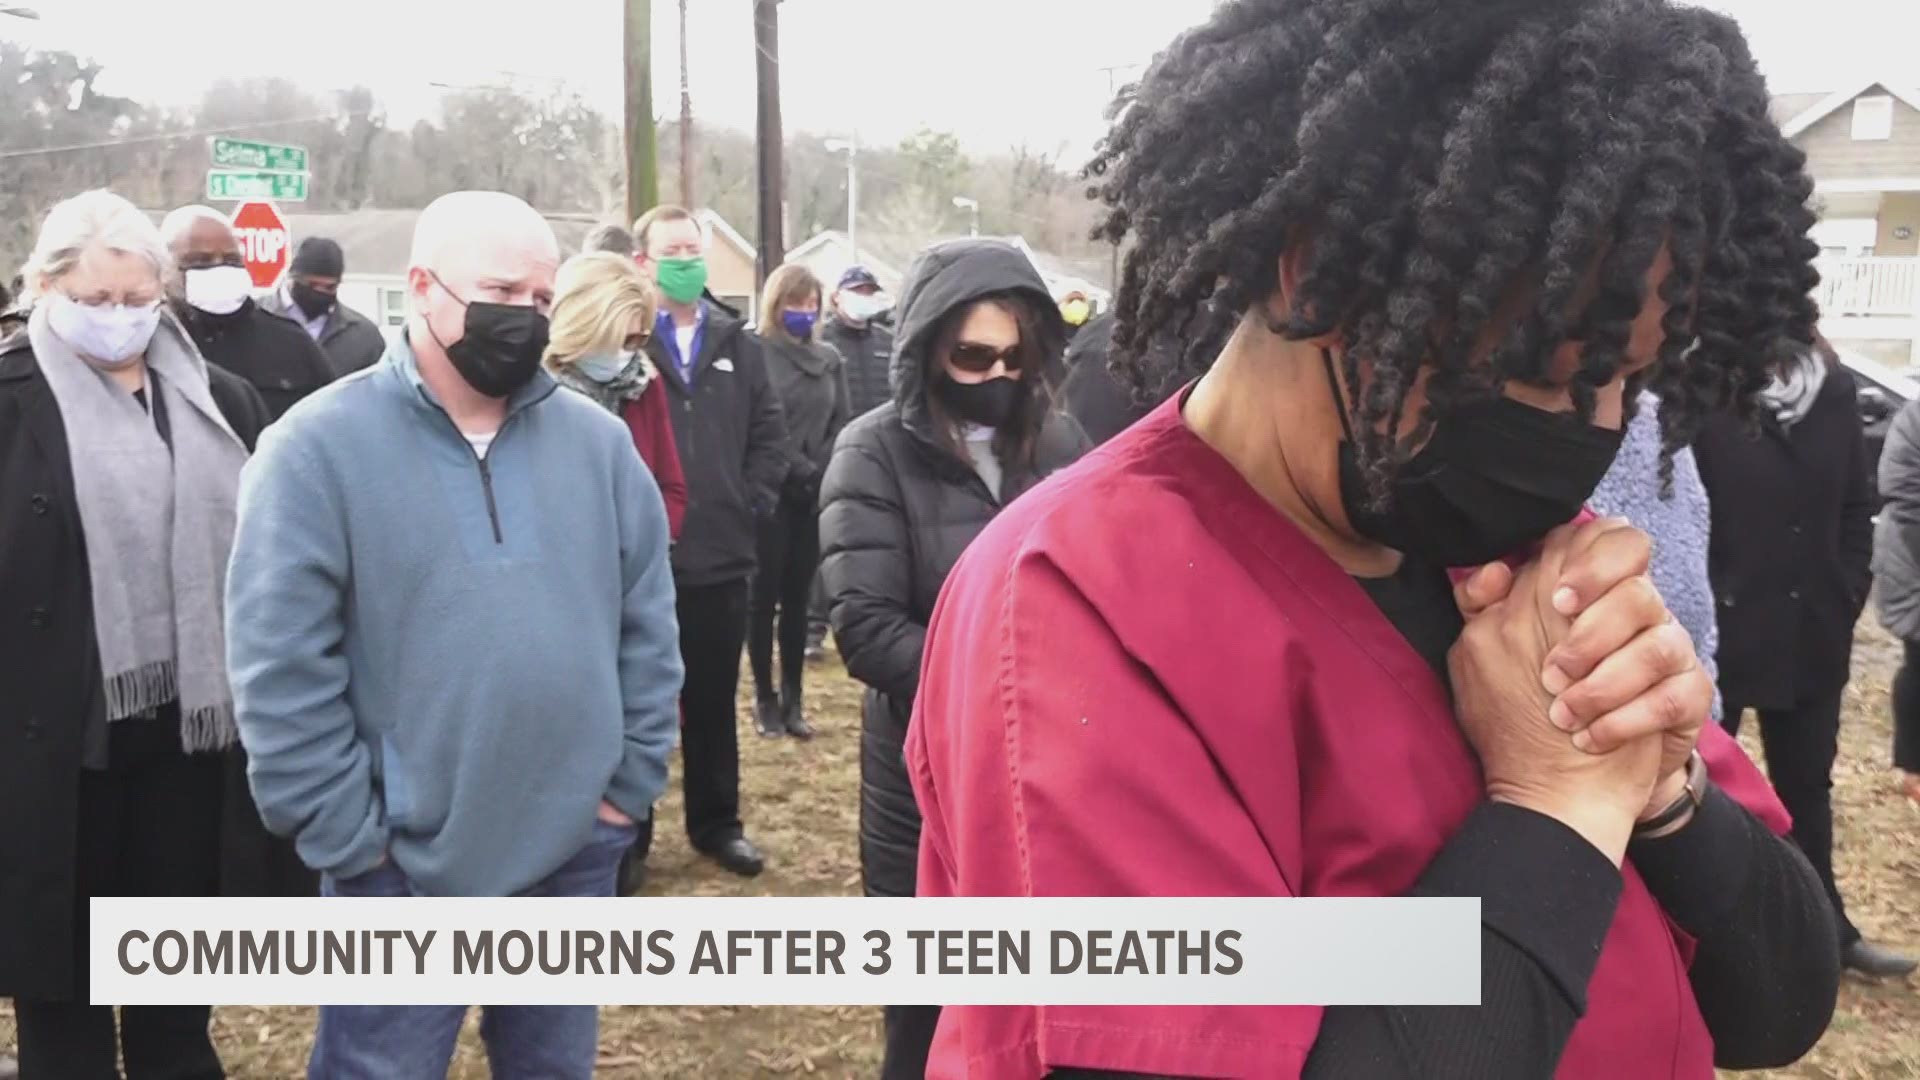 The Knoxville community is looking for answers after three students have died in gun violence.